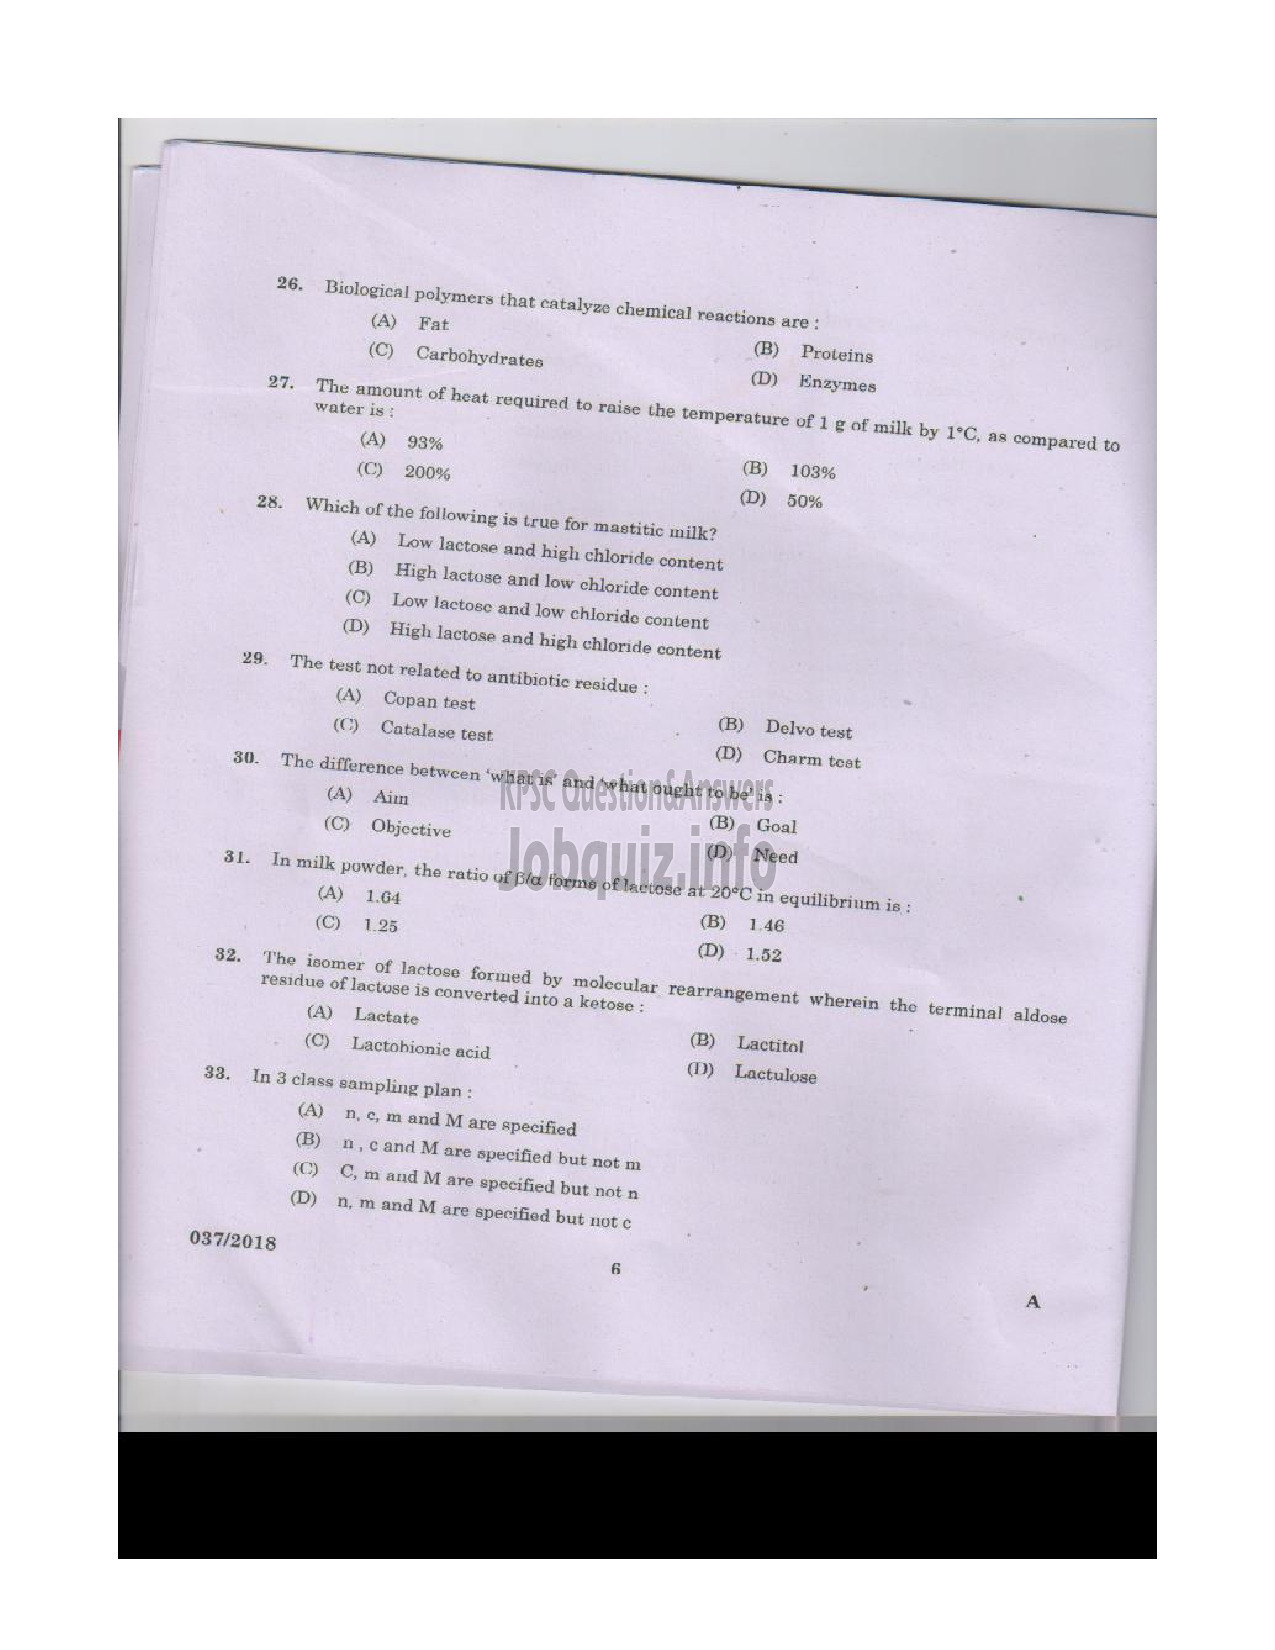 Kerala PSC Question Paper - VOCATIONAL INSTRUCTOR IN DAIRYING MILK PRODUCTS VOCATIONAL HIGHER SECONDARY EDUCATION-5